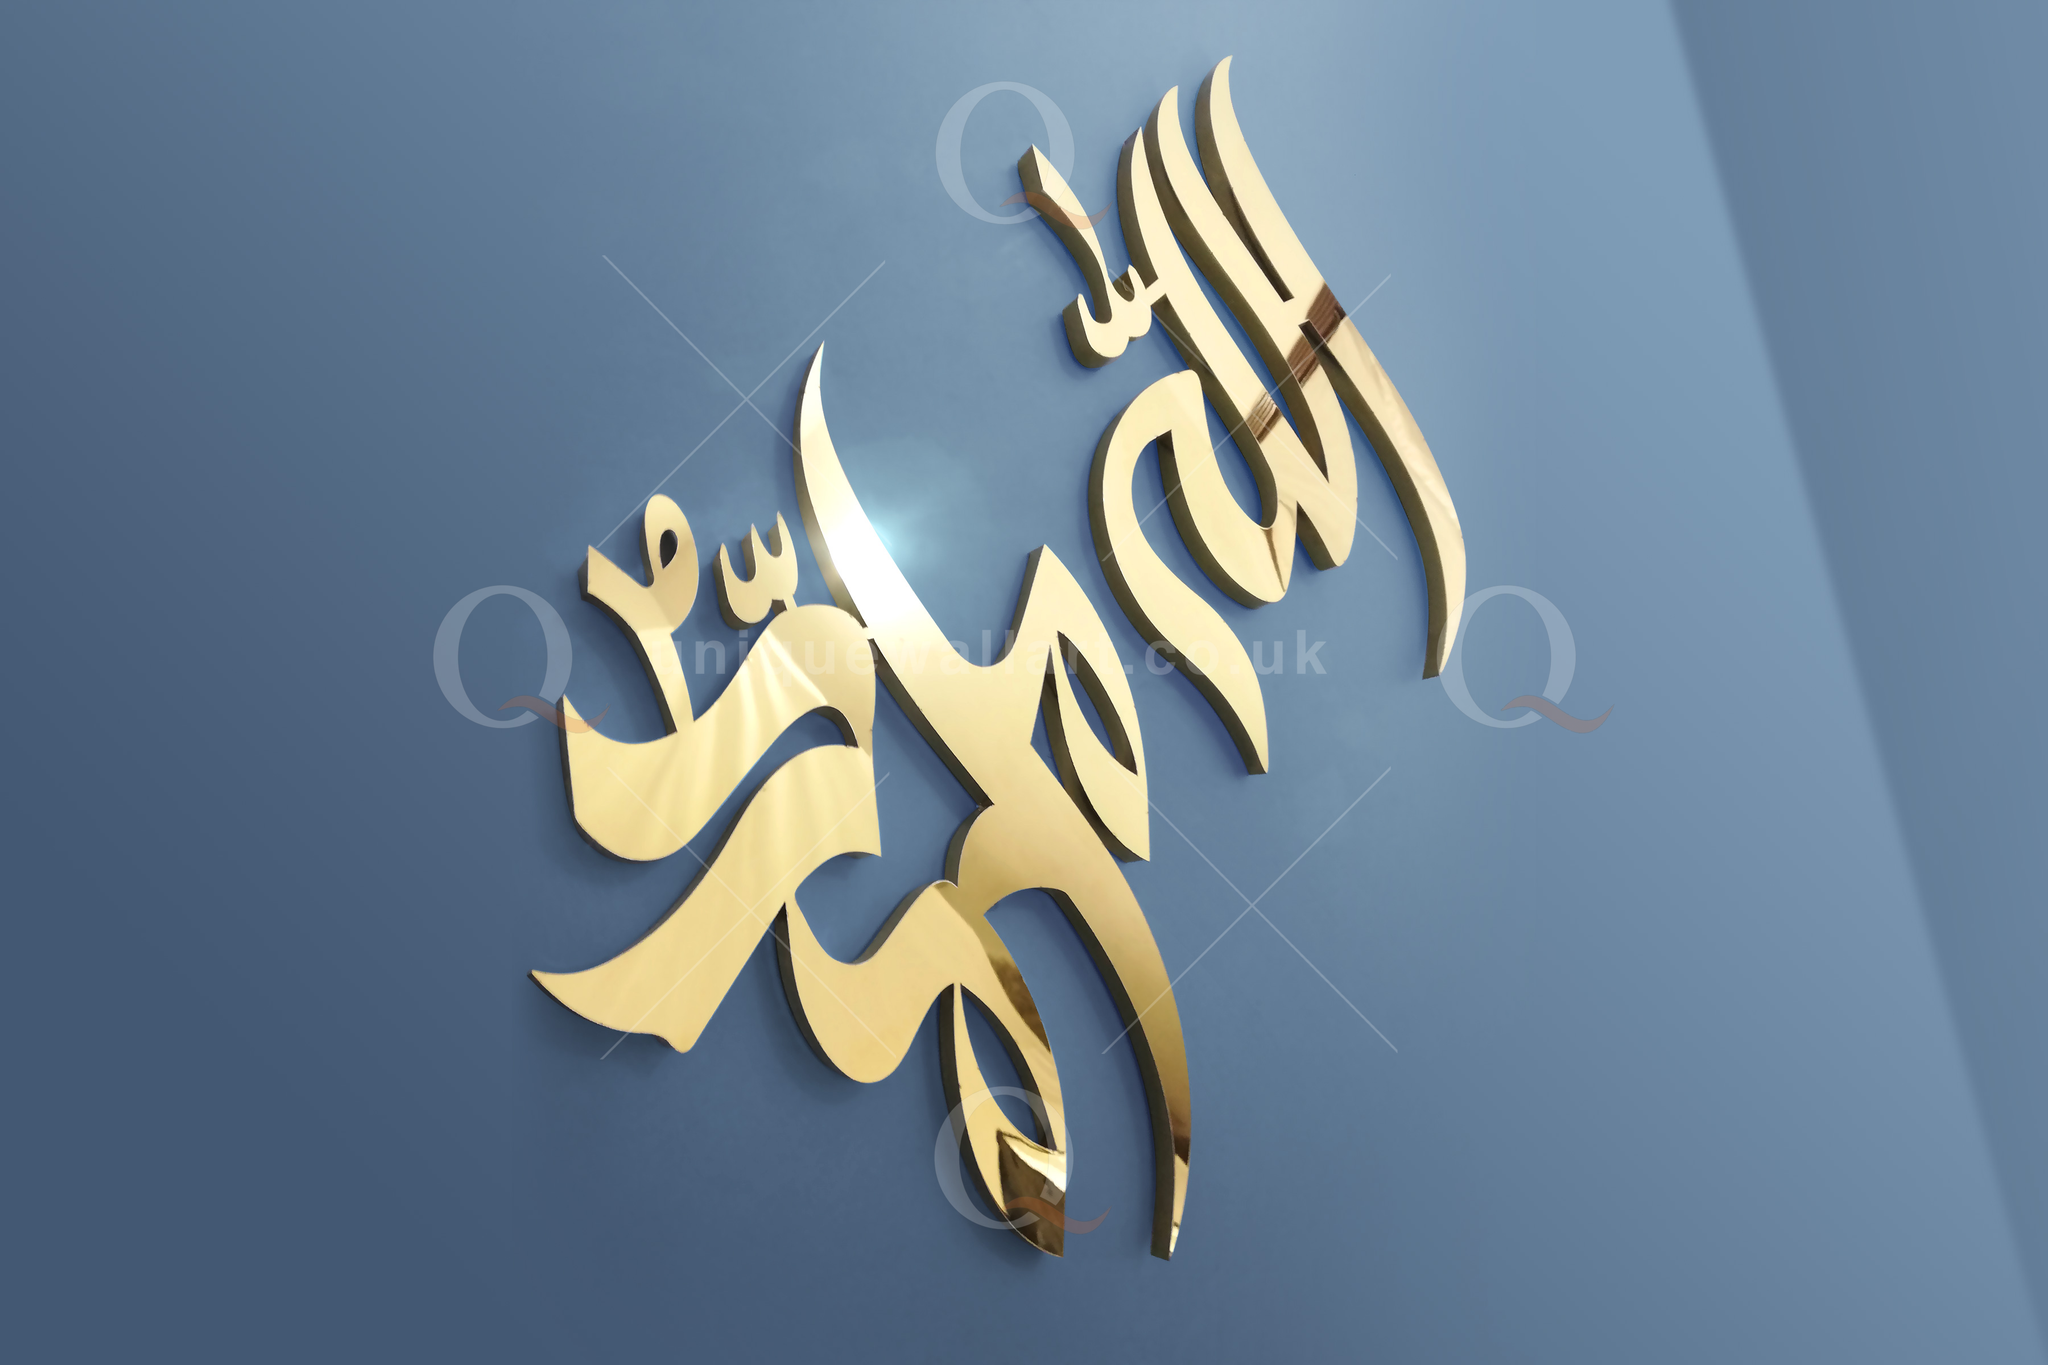 Allah Muhammad calligraphy Wall Art 3D Stainless Steel